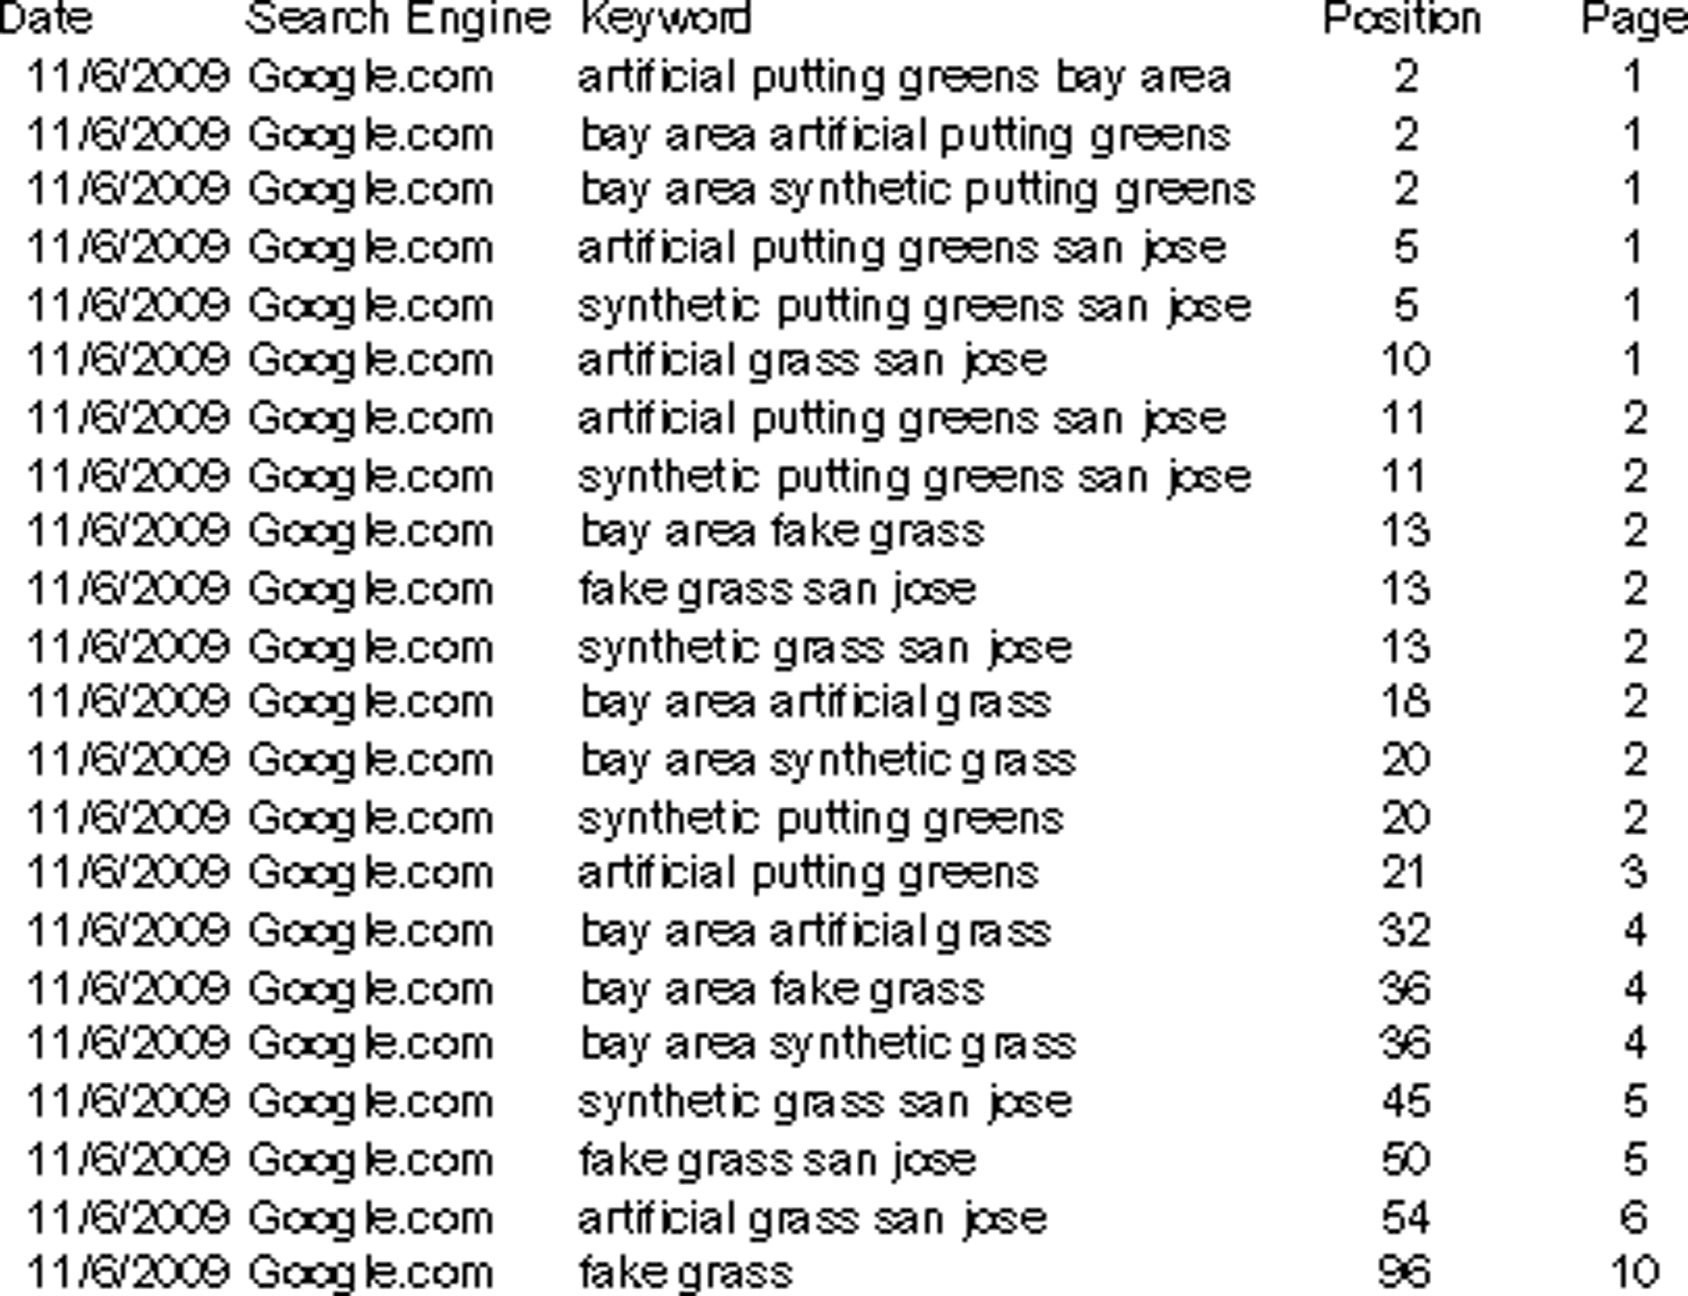 SERP Results Search Engine Optimization for Bay Area Synthetic Grass